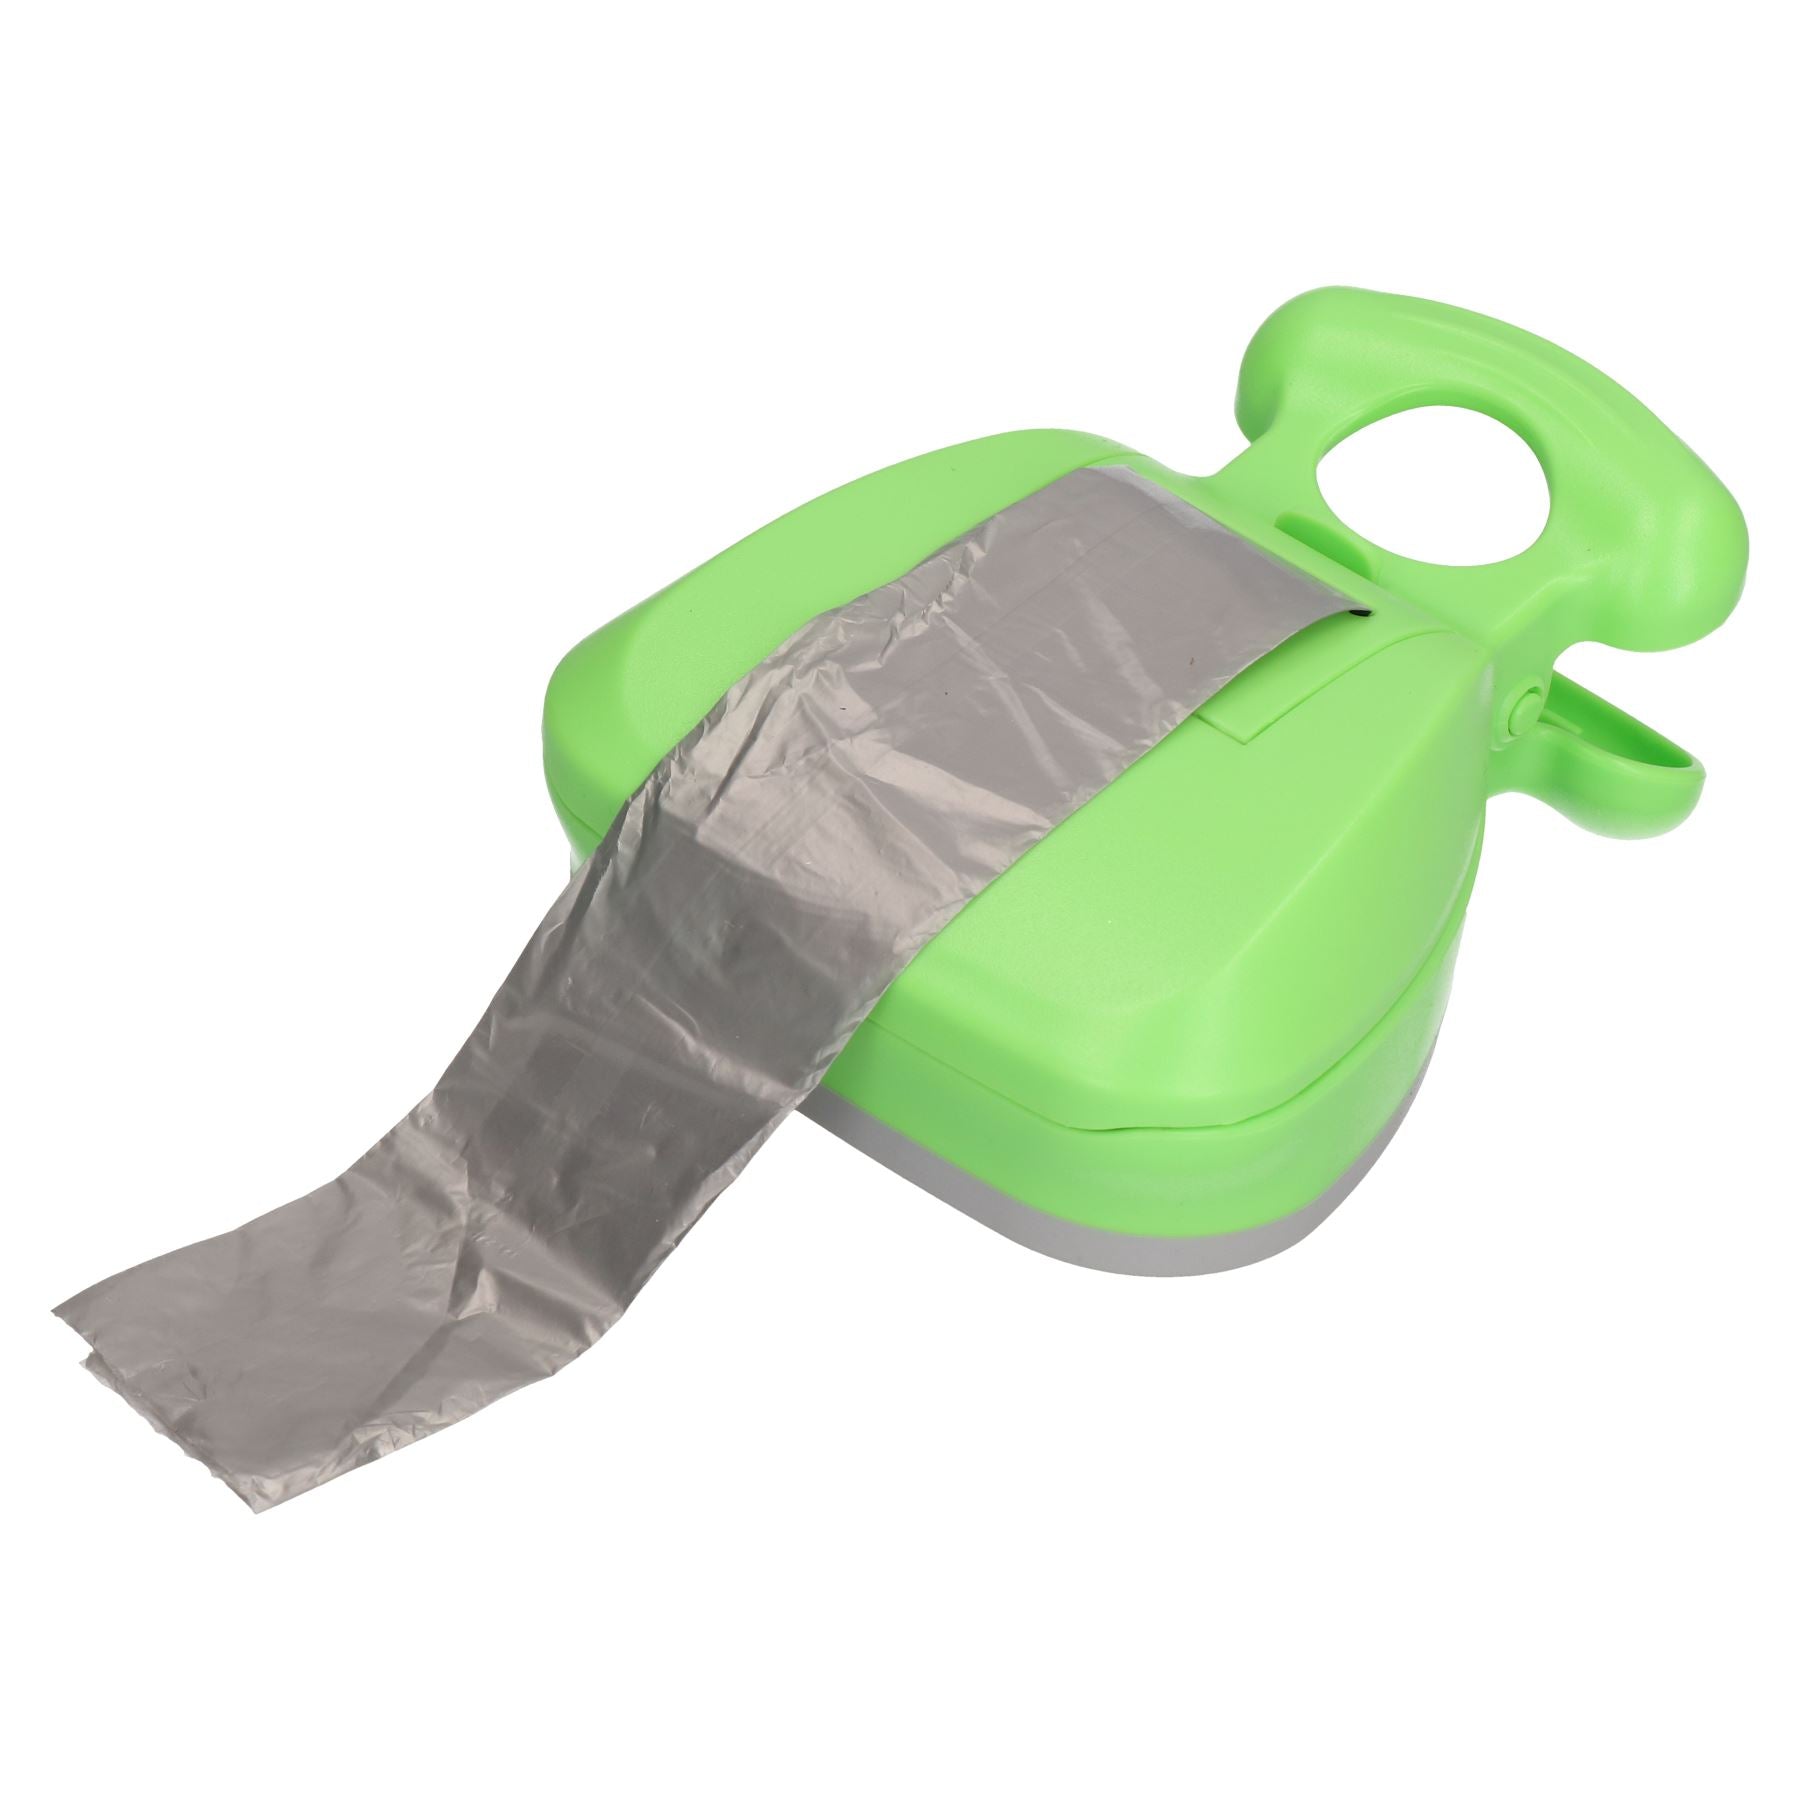 Easy Pick-Up Portable Waste Scooper for Dogs and 1 Roll of Poo Bags